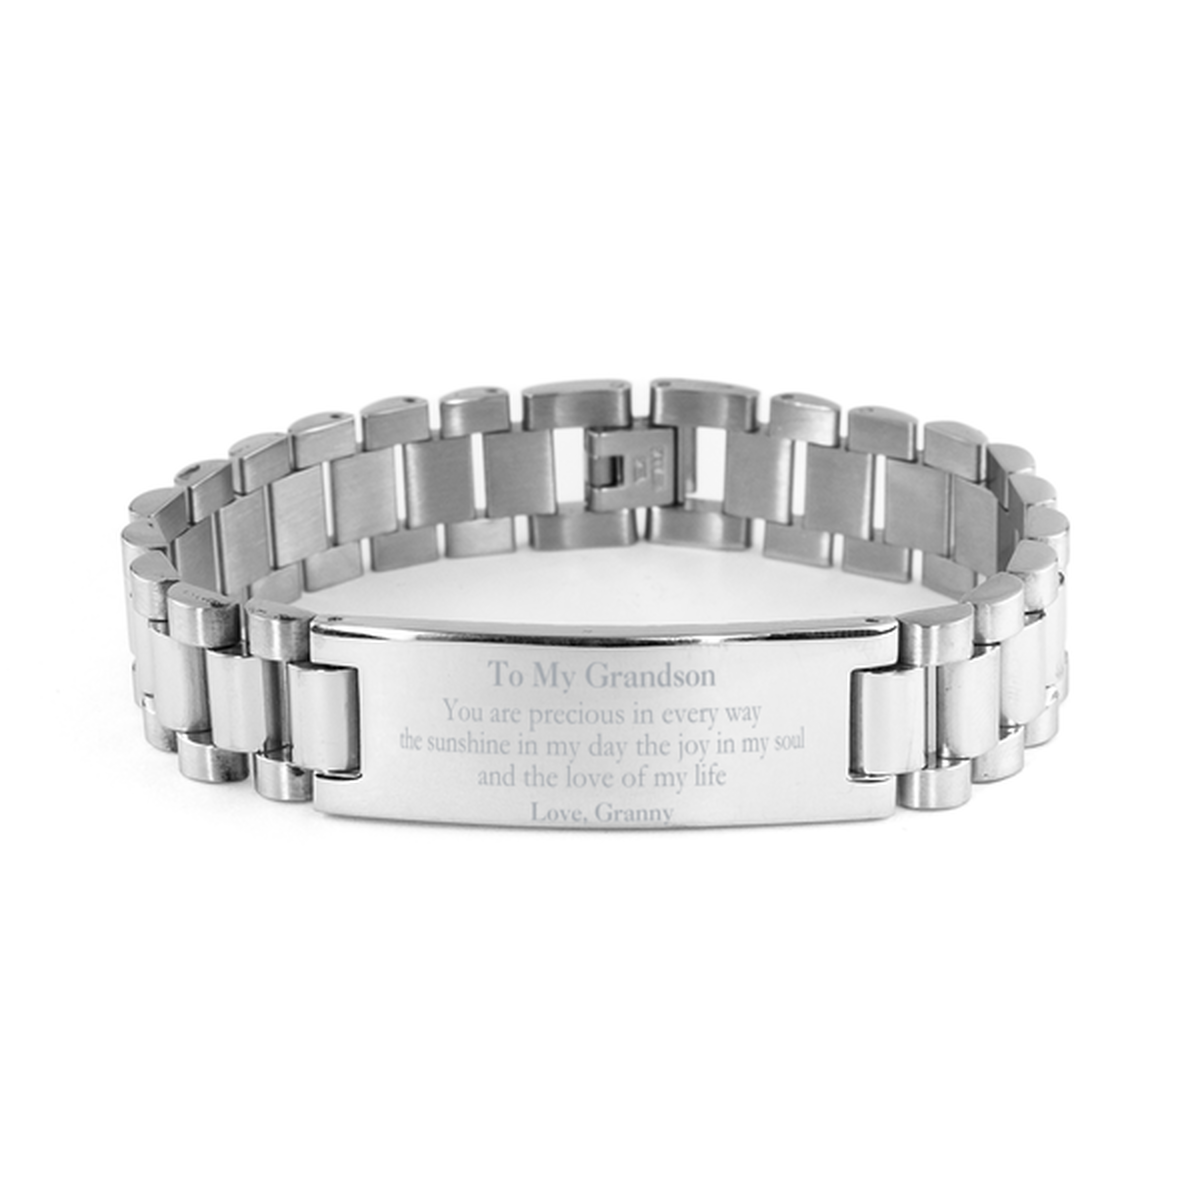 Graduation Gifts for Grandson Ladder Stainless Steel Bracelet Present from Granny, Christmas Grandson Birthday Gifts Grandson You are precious in every way the sunshine in my day. Love, Granny